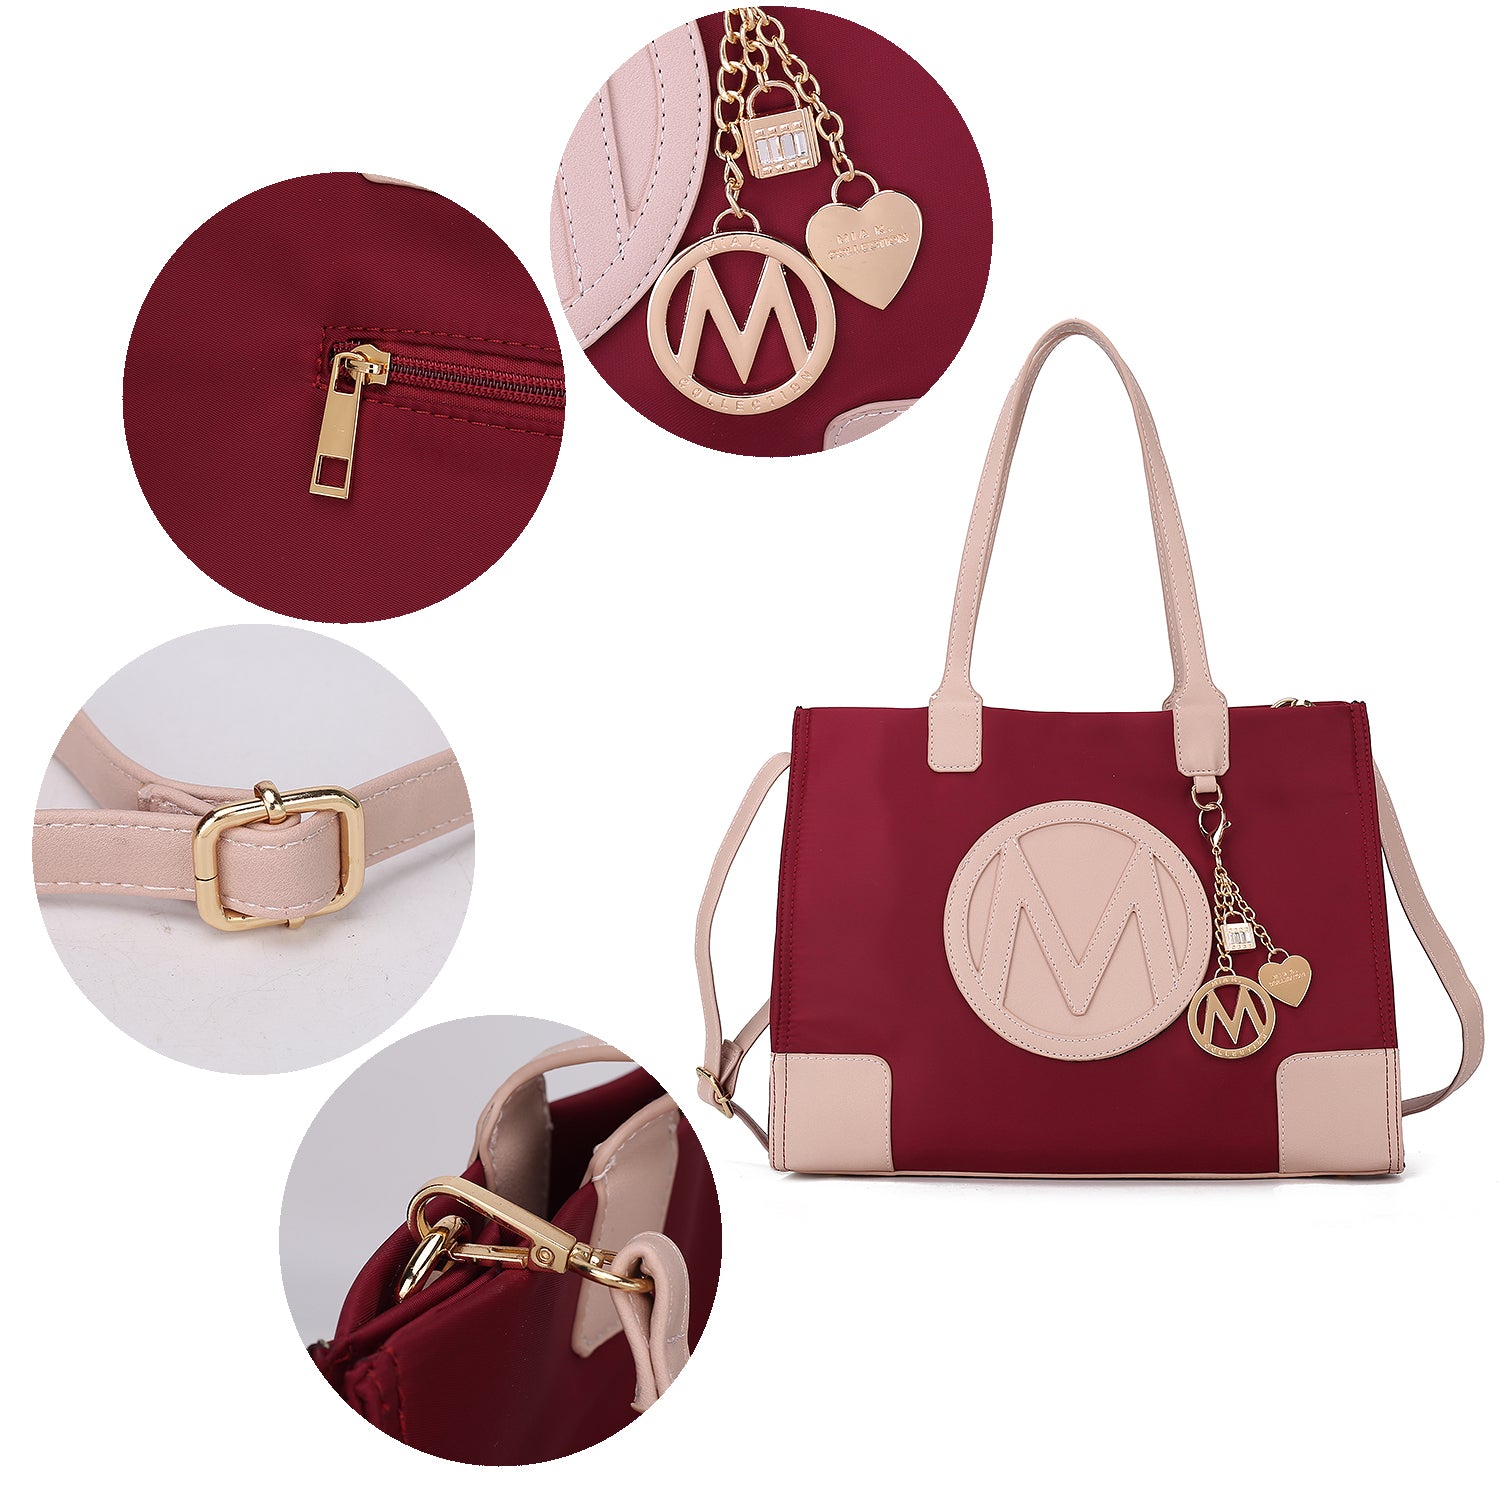 A Pink Orpheus Louise Tote Handbag and Wallet Set Vegan Leather with a chain and charms.